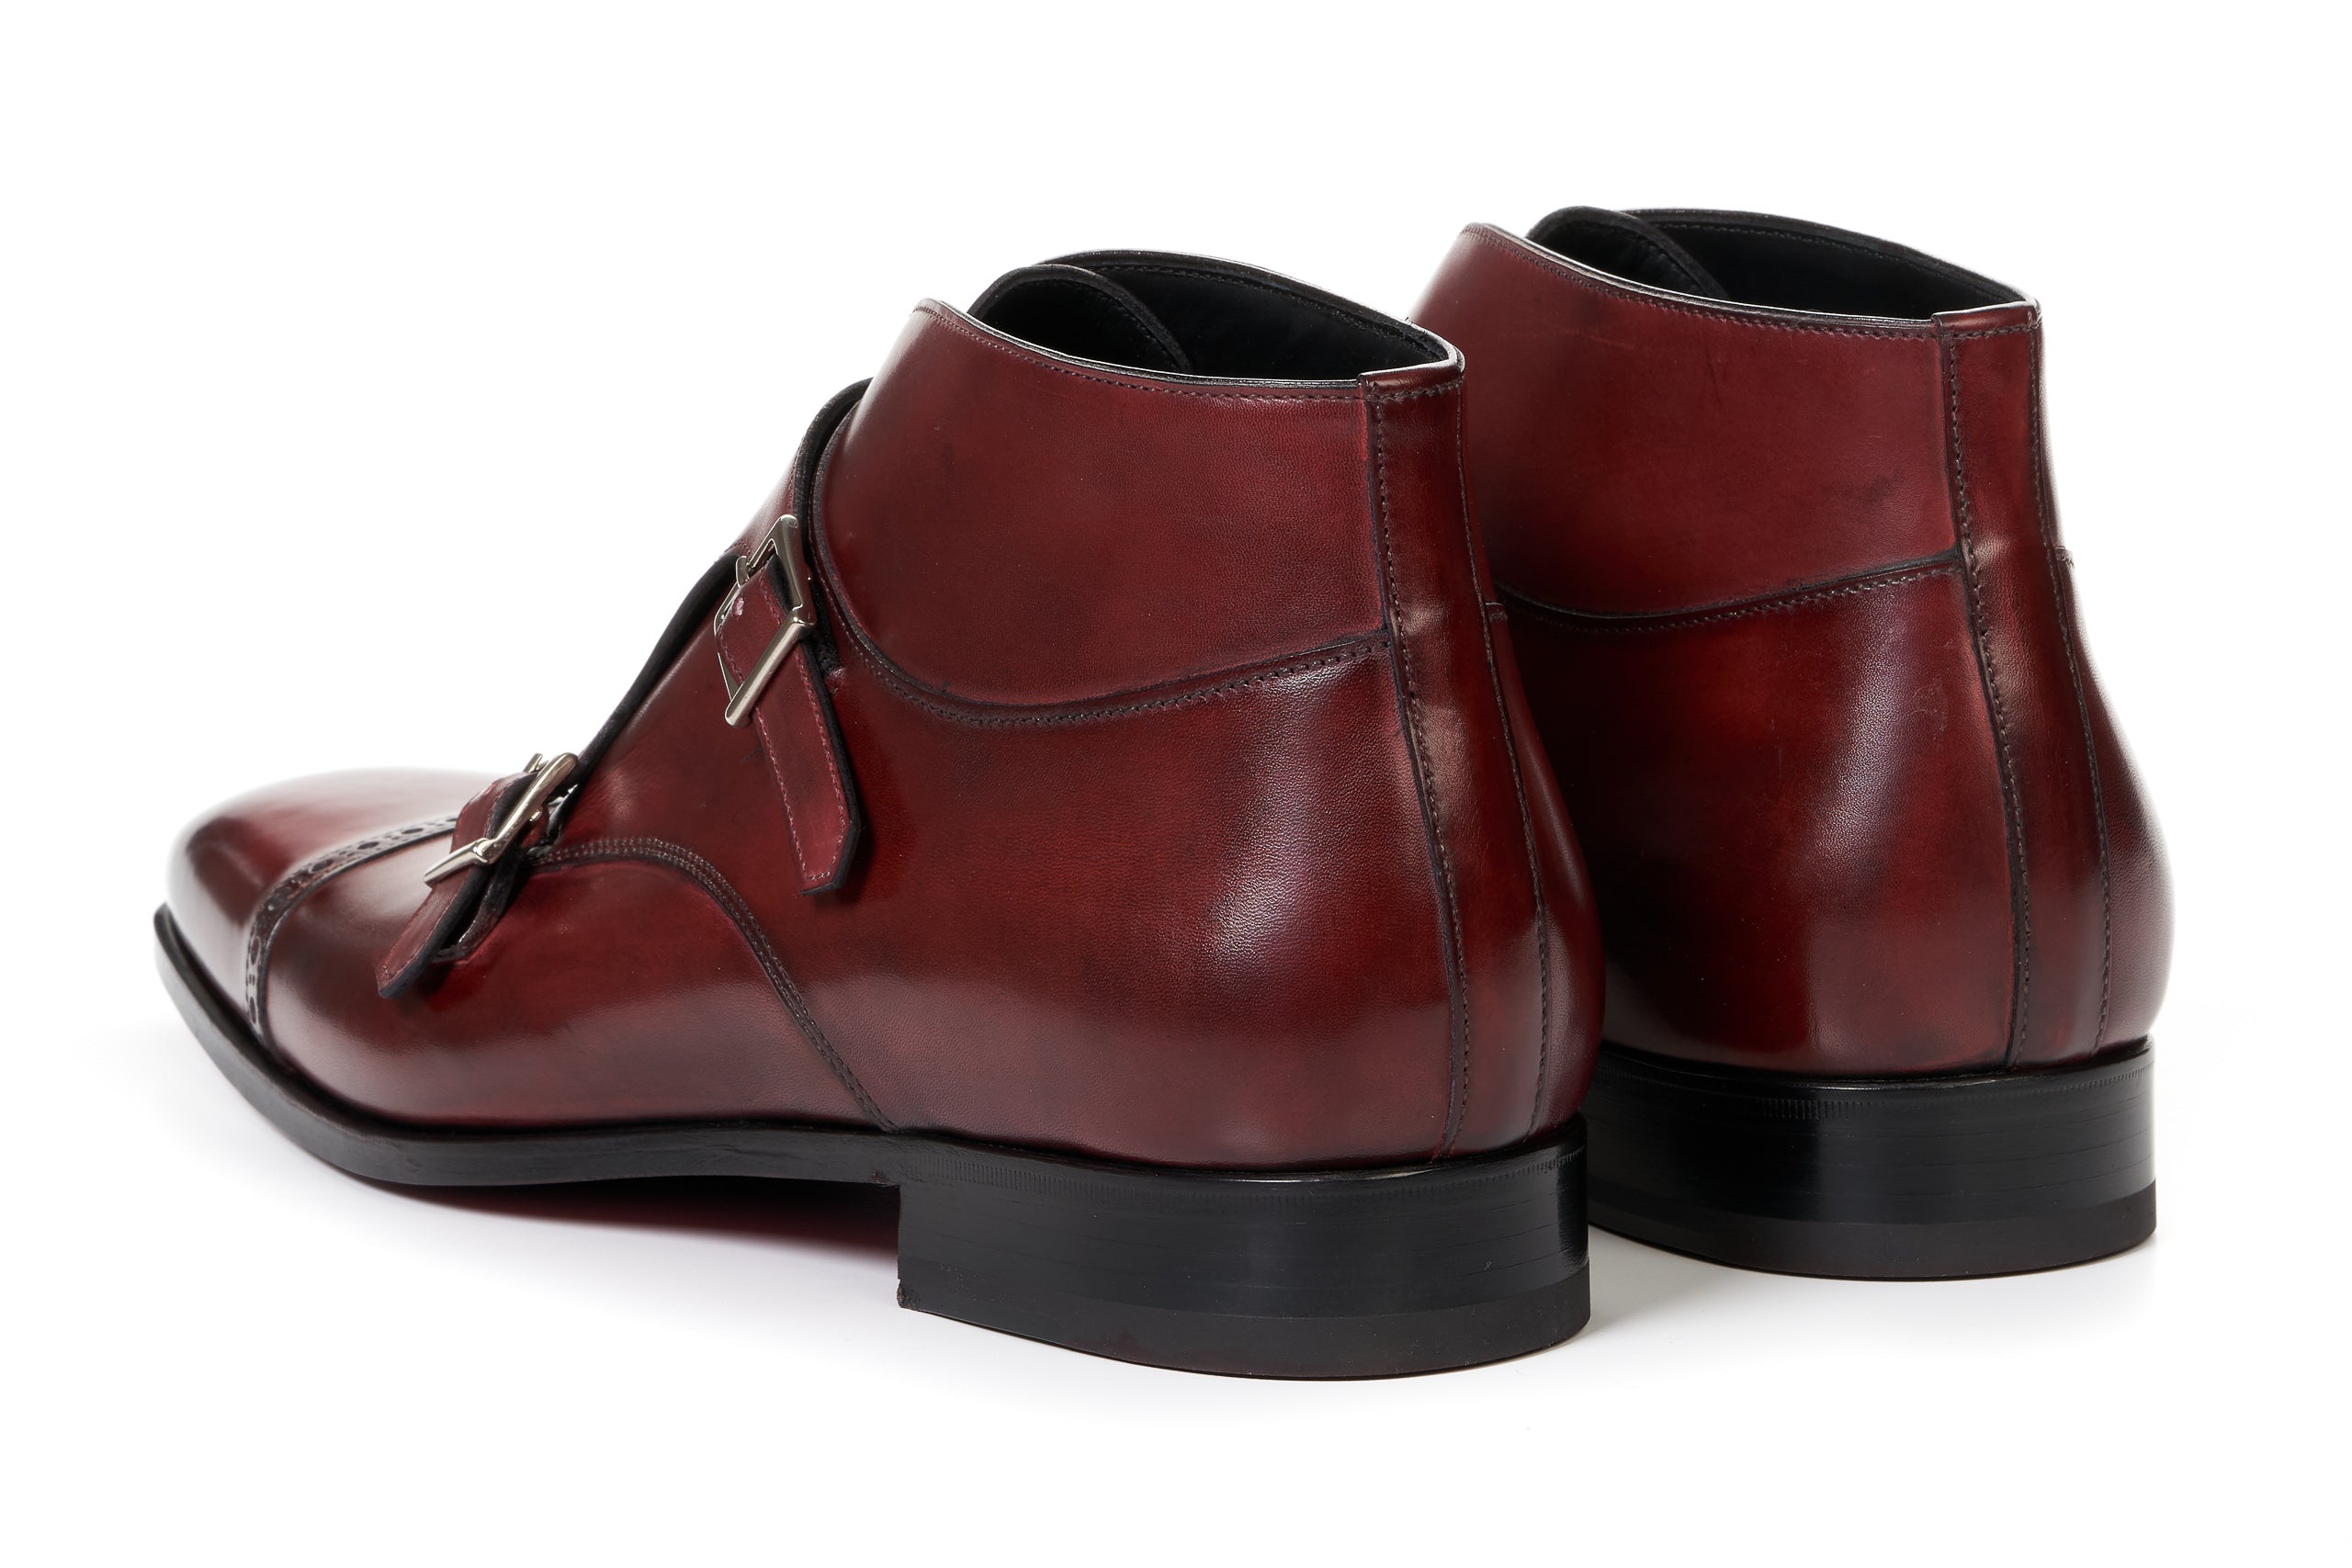 The Heston Double Monk Strap Boot - Oxblood